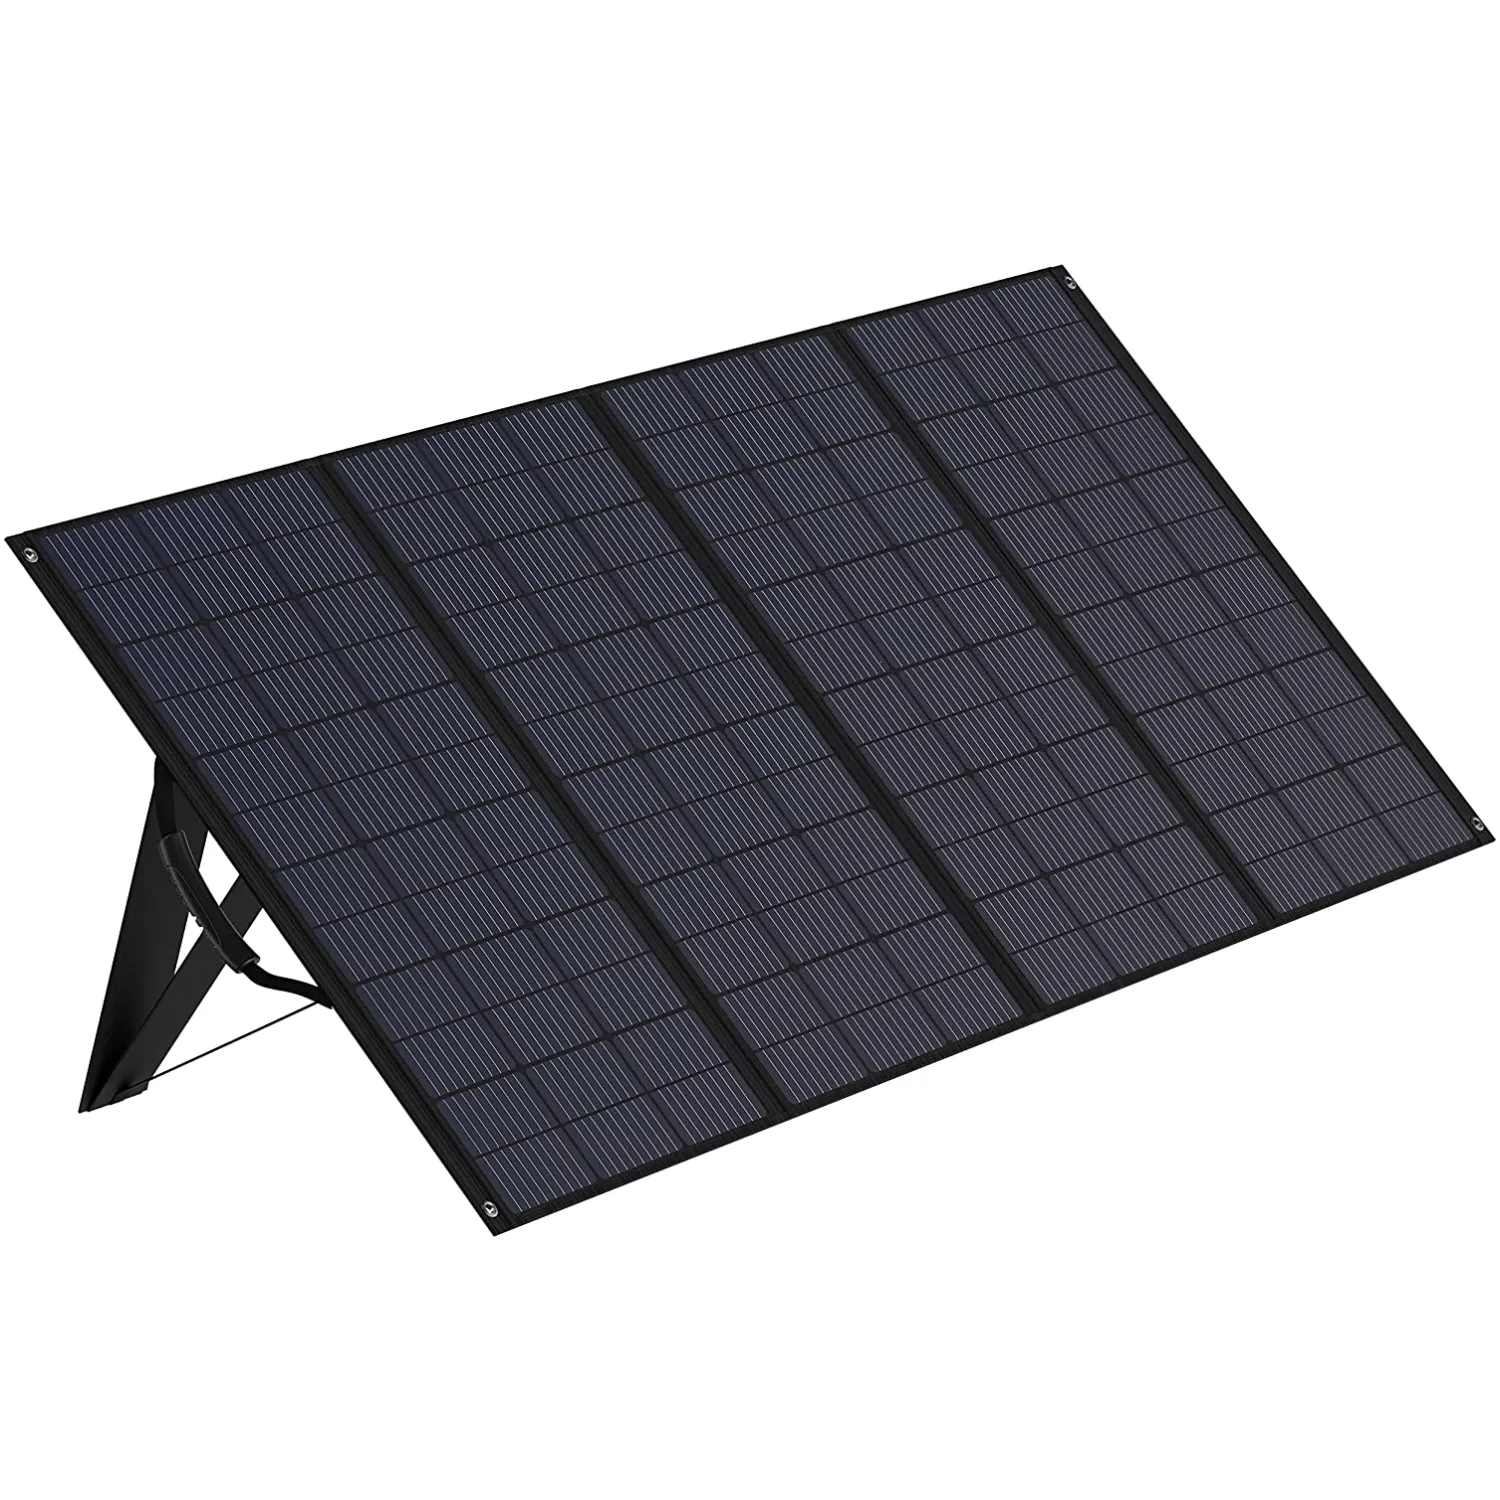 Actory direct 400W ortable Solar ananel olable ananel con un ickdjustable ick, ateraterproof I65, MC4 Output harolar Harger